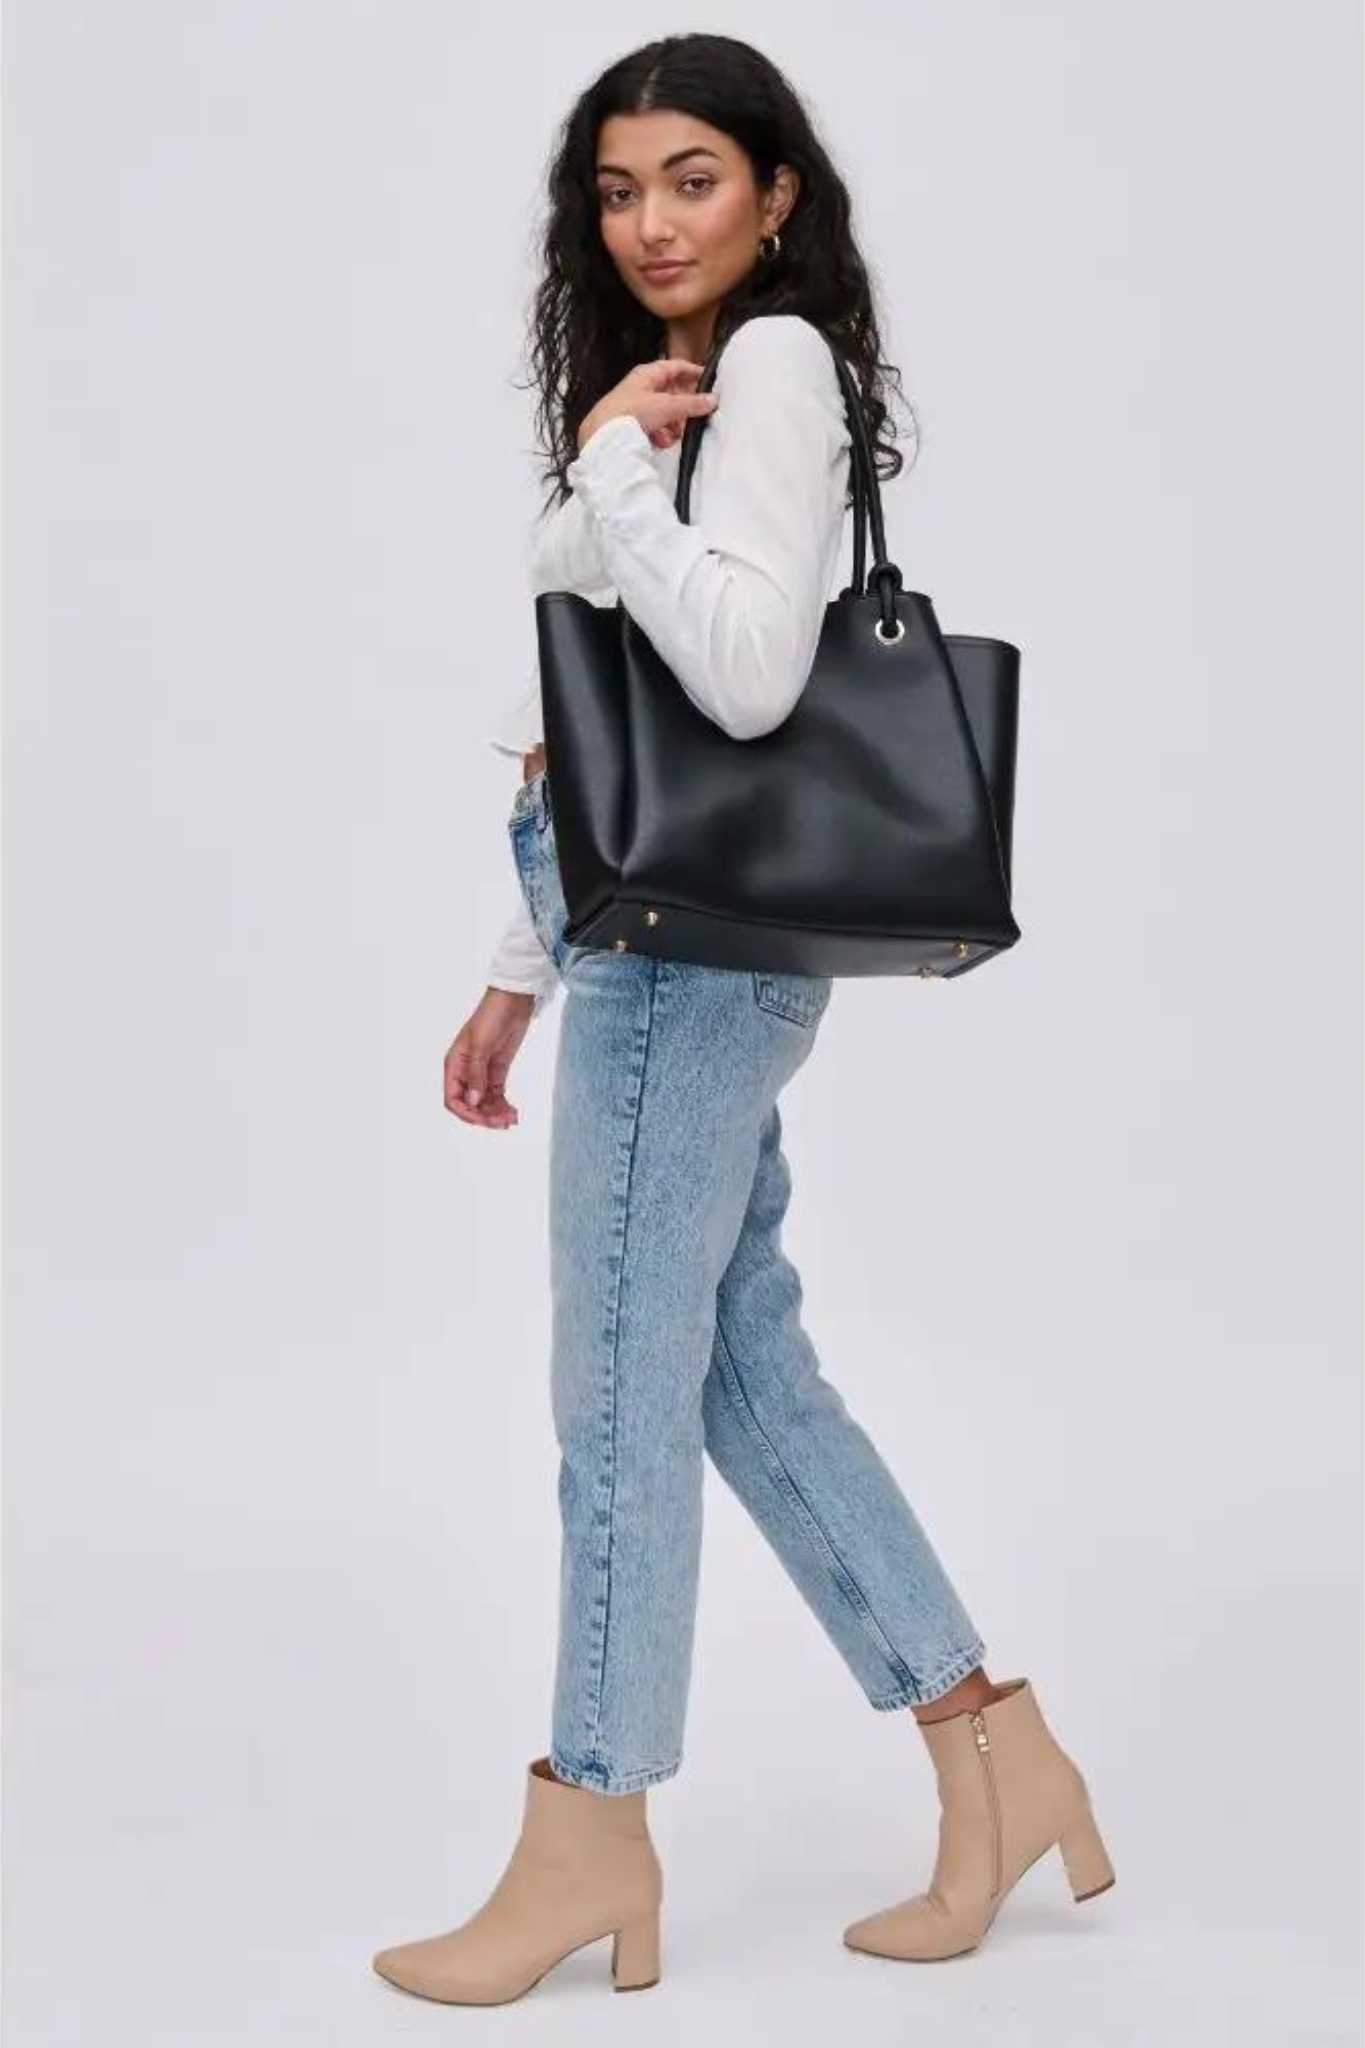 Urban Expressions | Brielle Tote | Sweetest Stitch Online Boutique